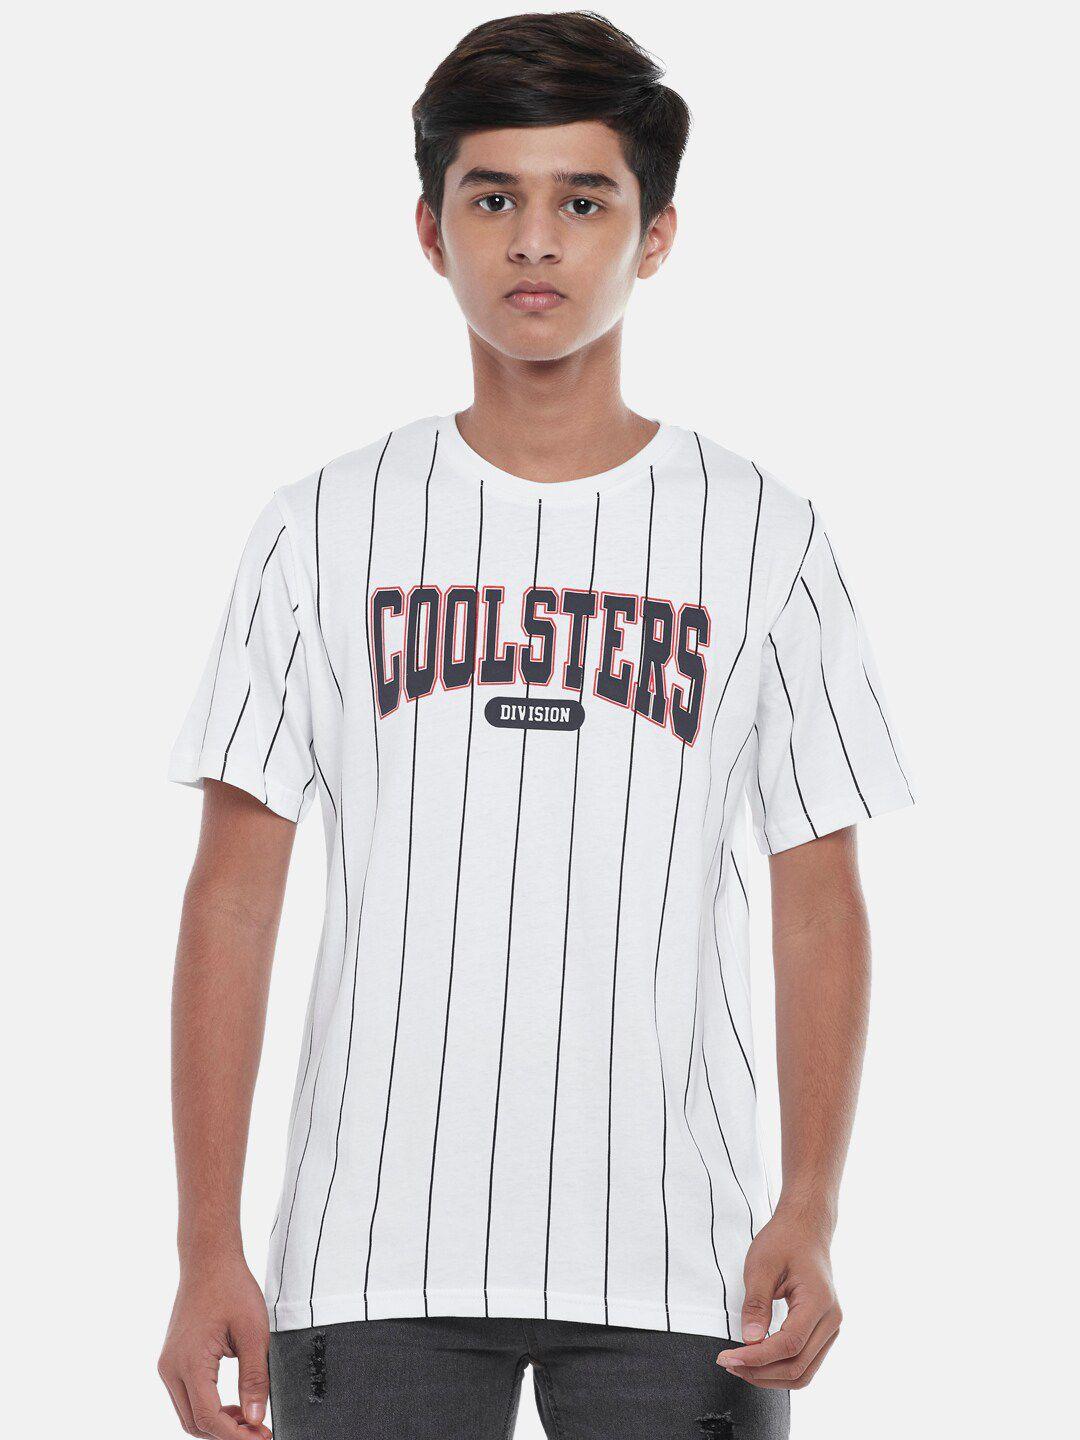 coolsters by pantaloons boys white striped  t-shirt